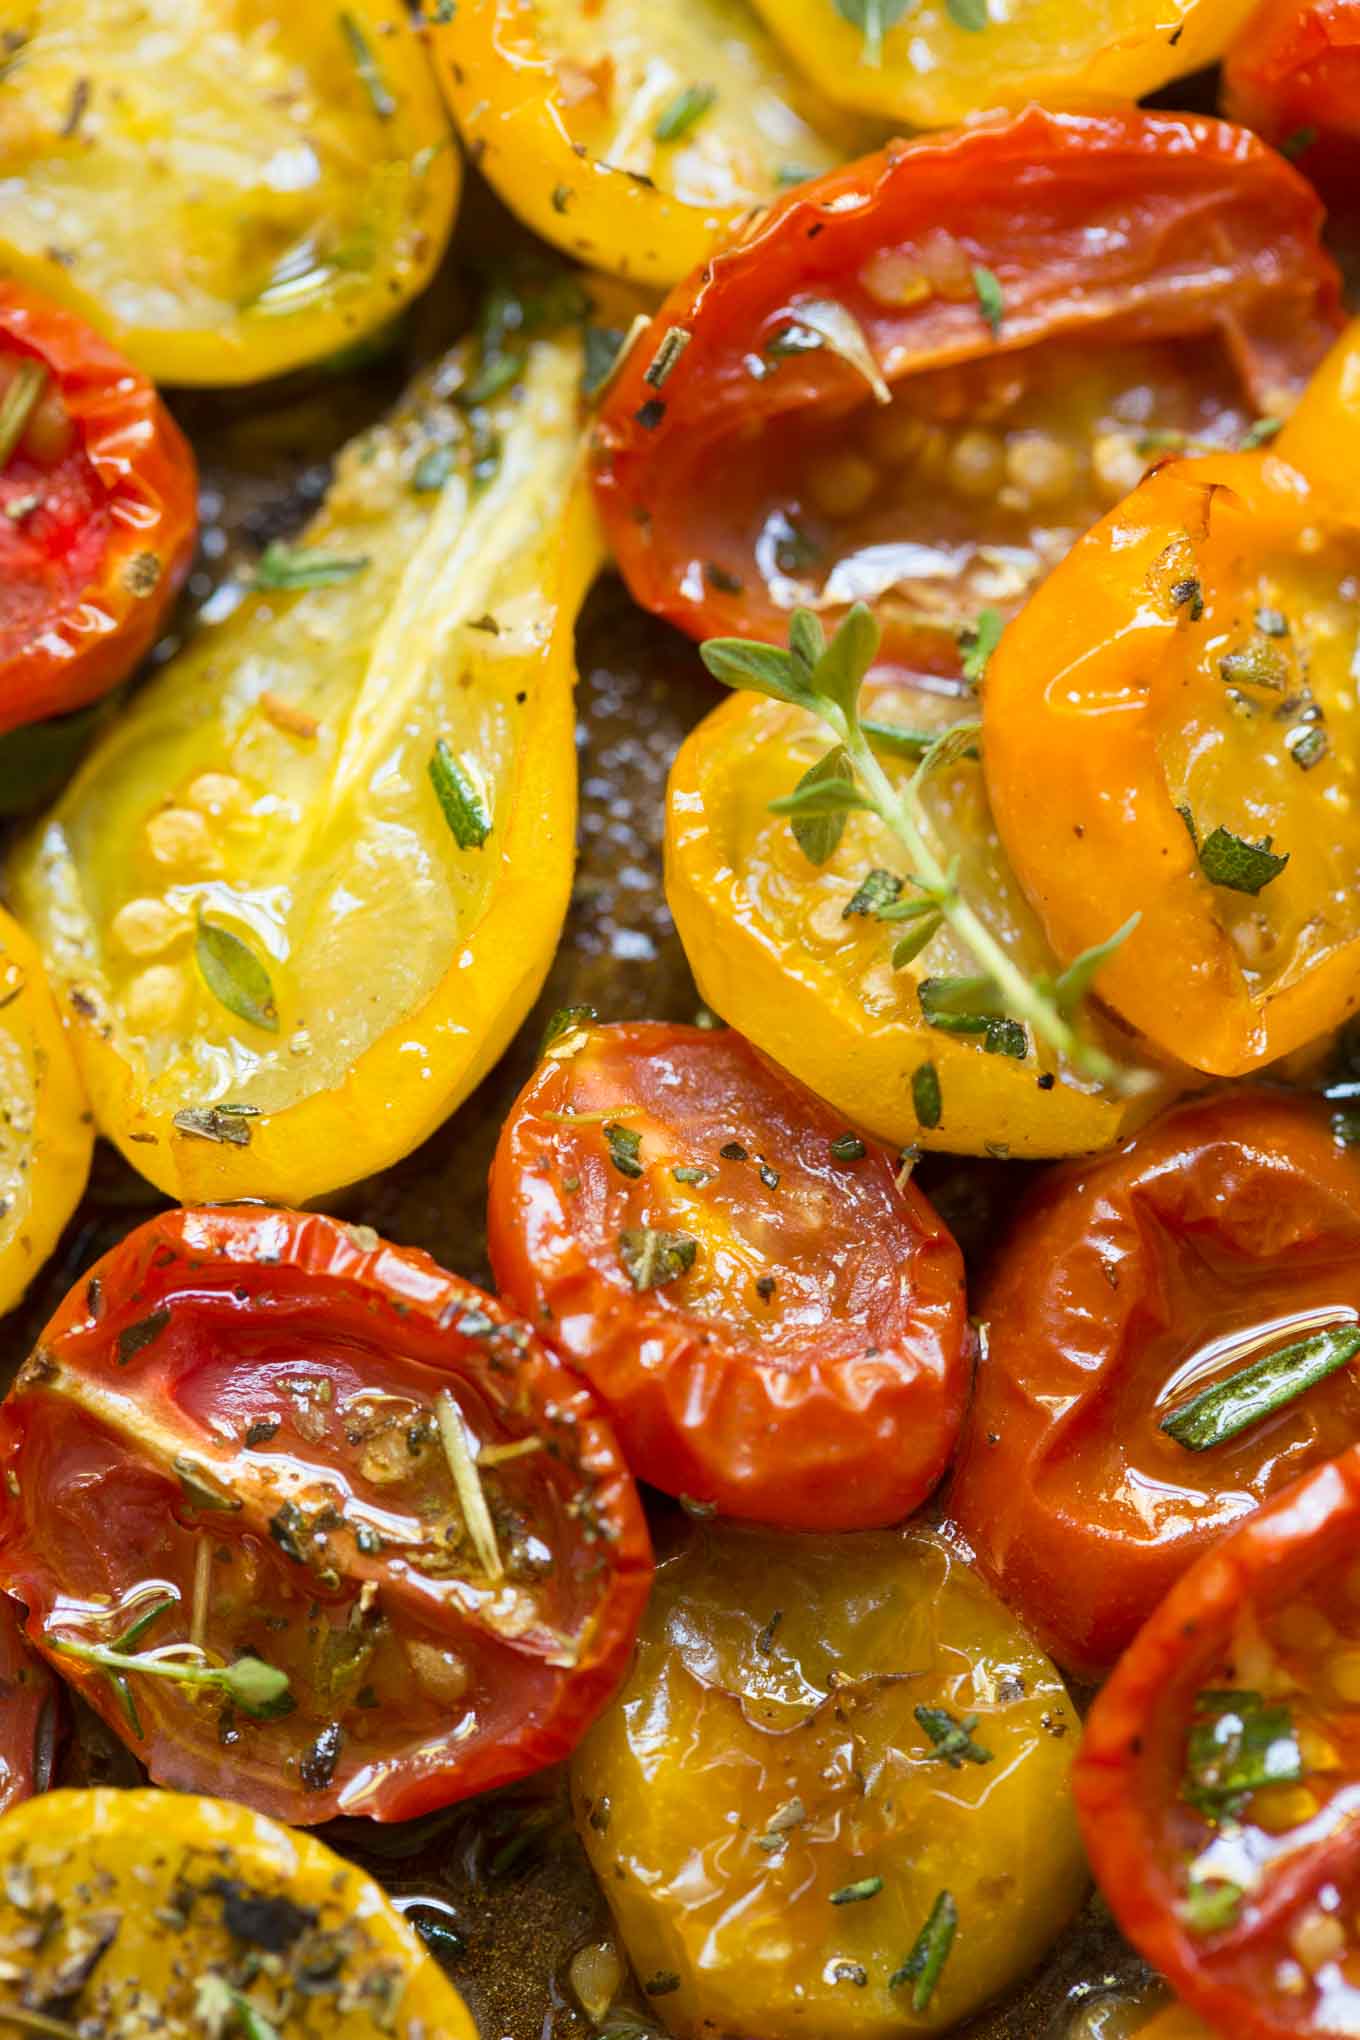 Garlic Herb Roasted Tomatoes - these incredibly flavorful roasted tomatoes are wonderful in salads, pasta dishes, on pizzas, sandwiches and a myriad of other uses! thecafesucrefarine.com